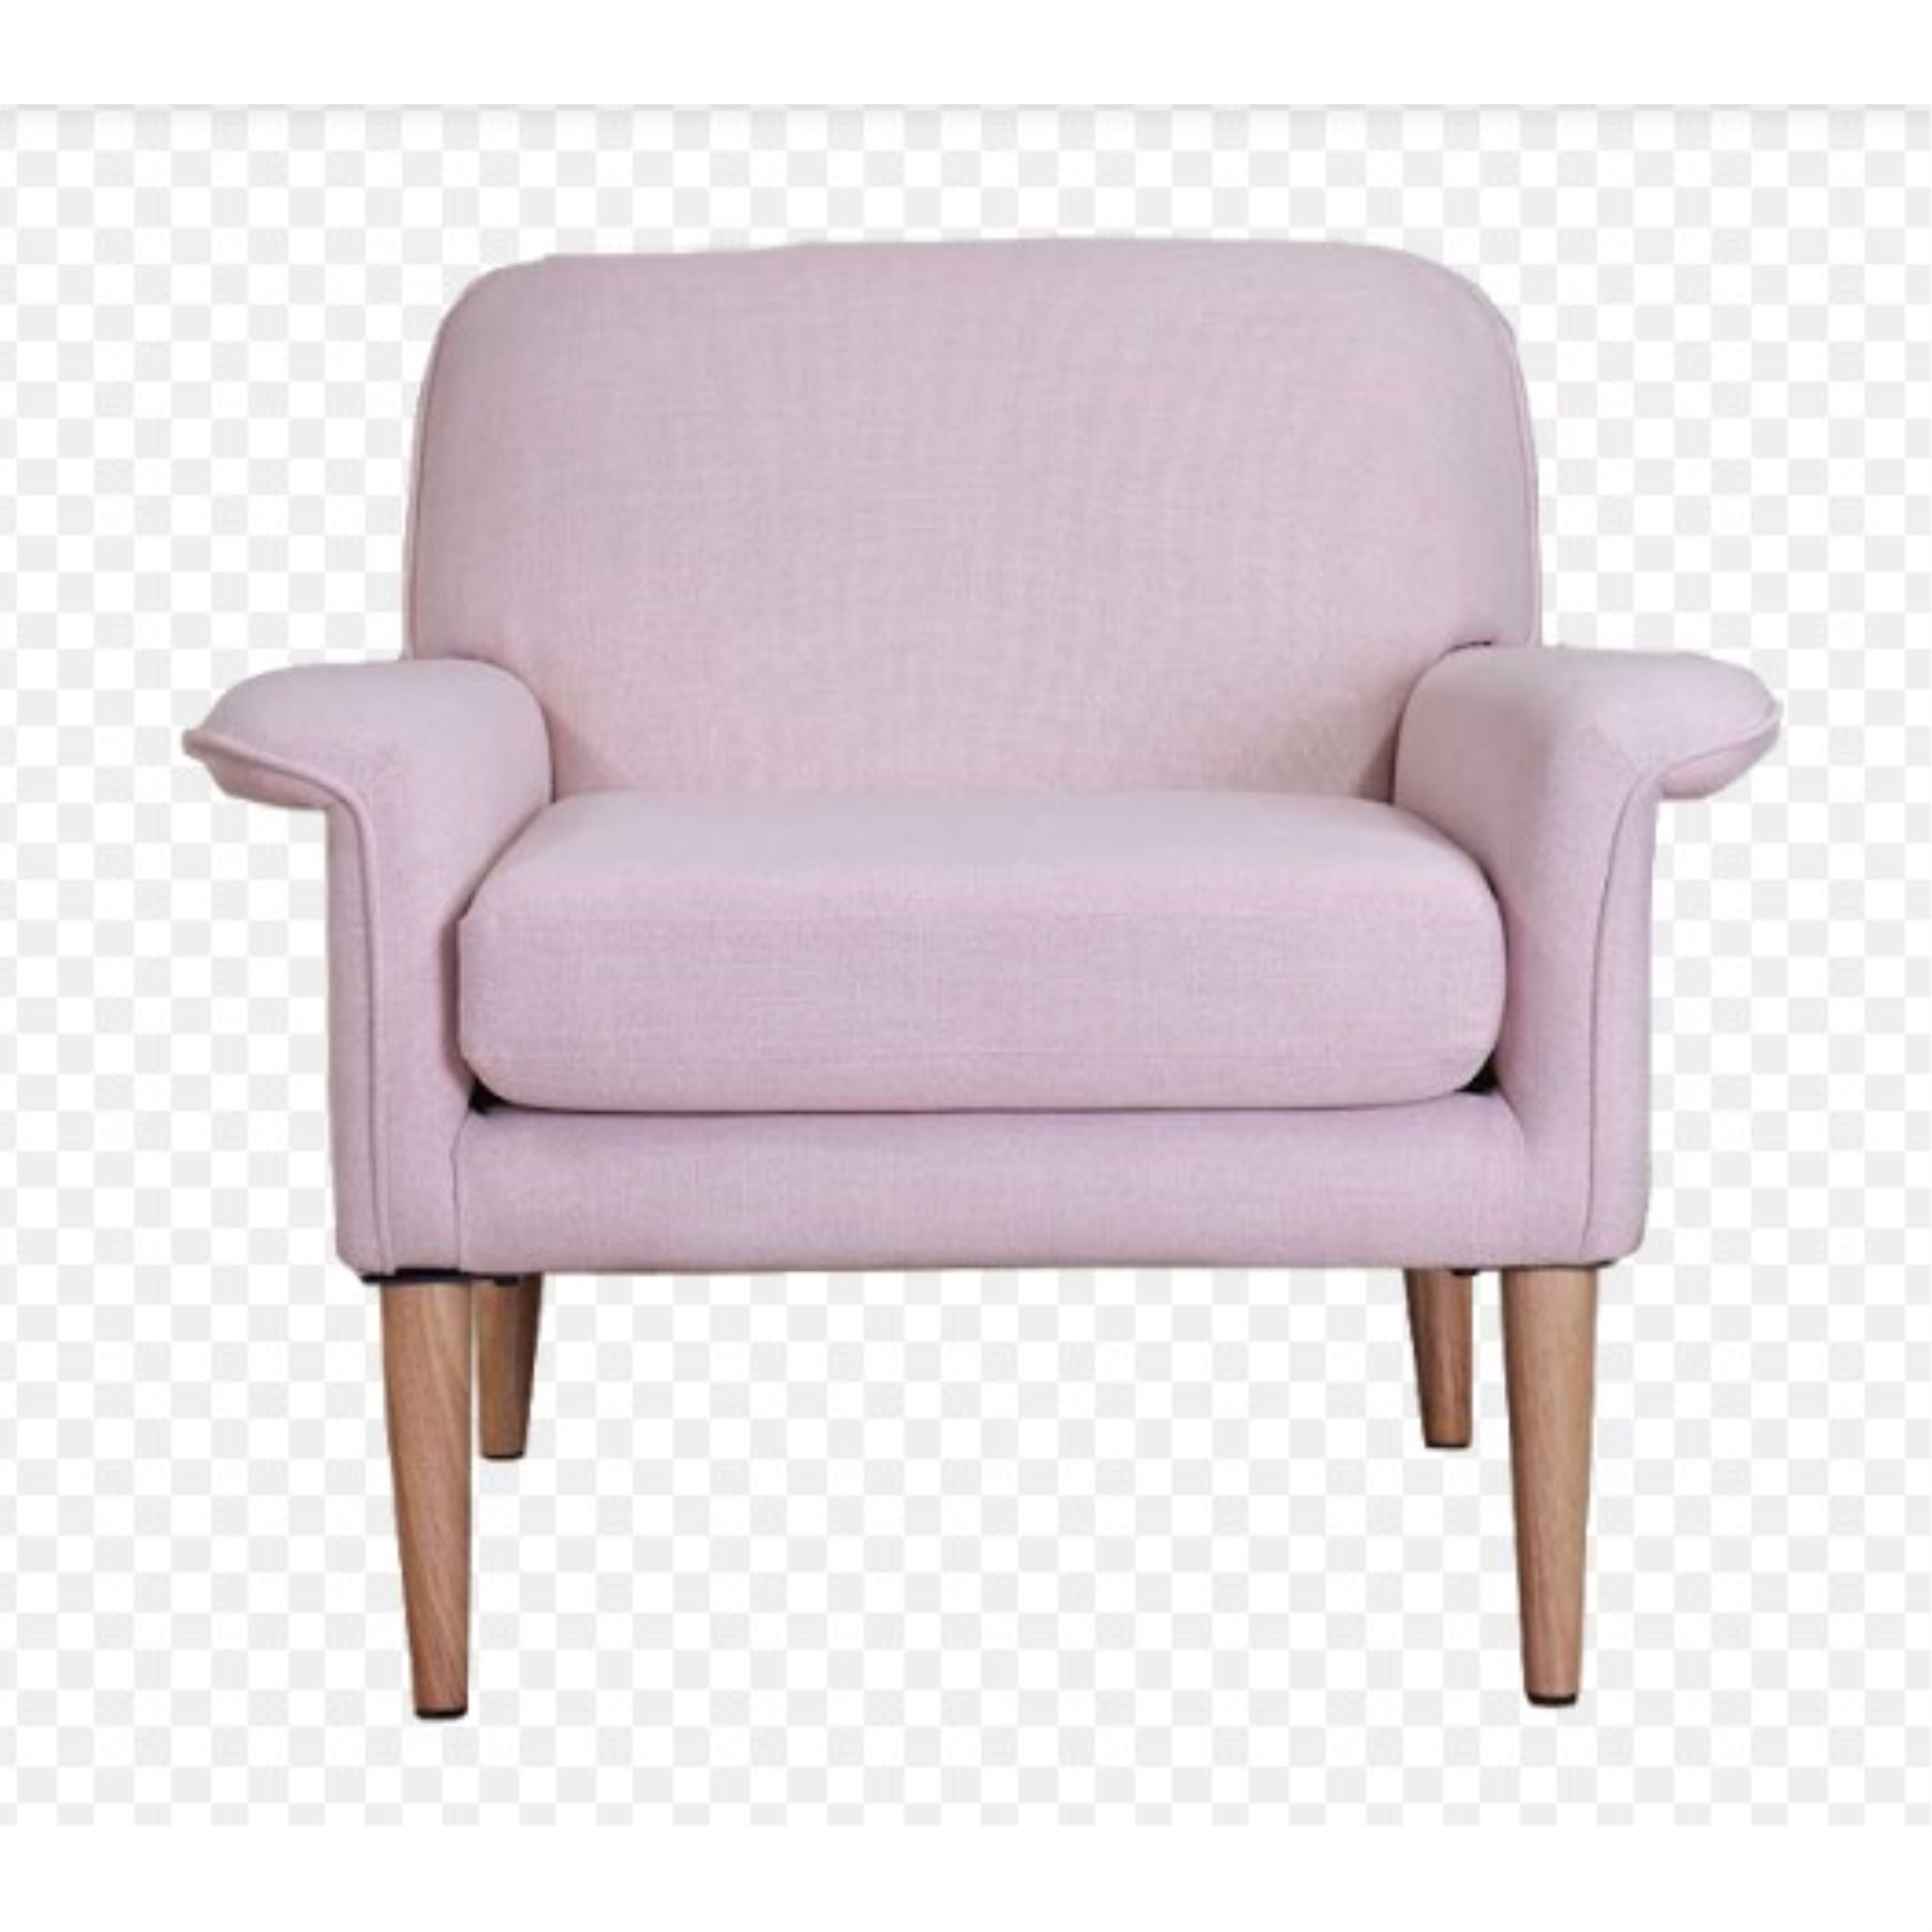 34" X 34" X 31" Pink Polyester Accent Chair